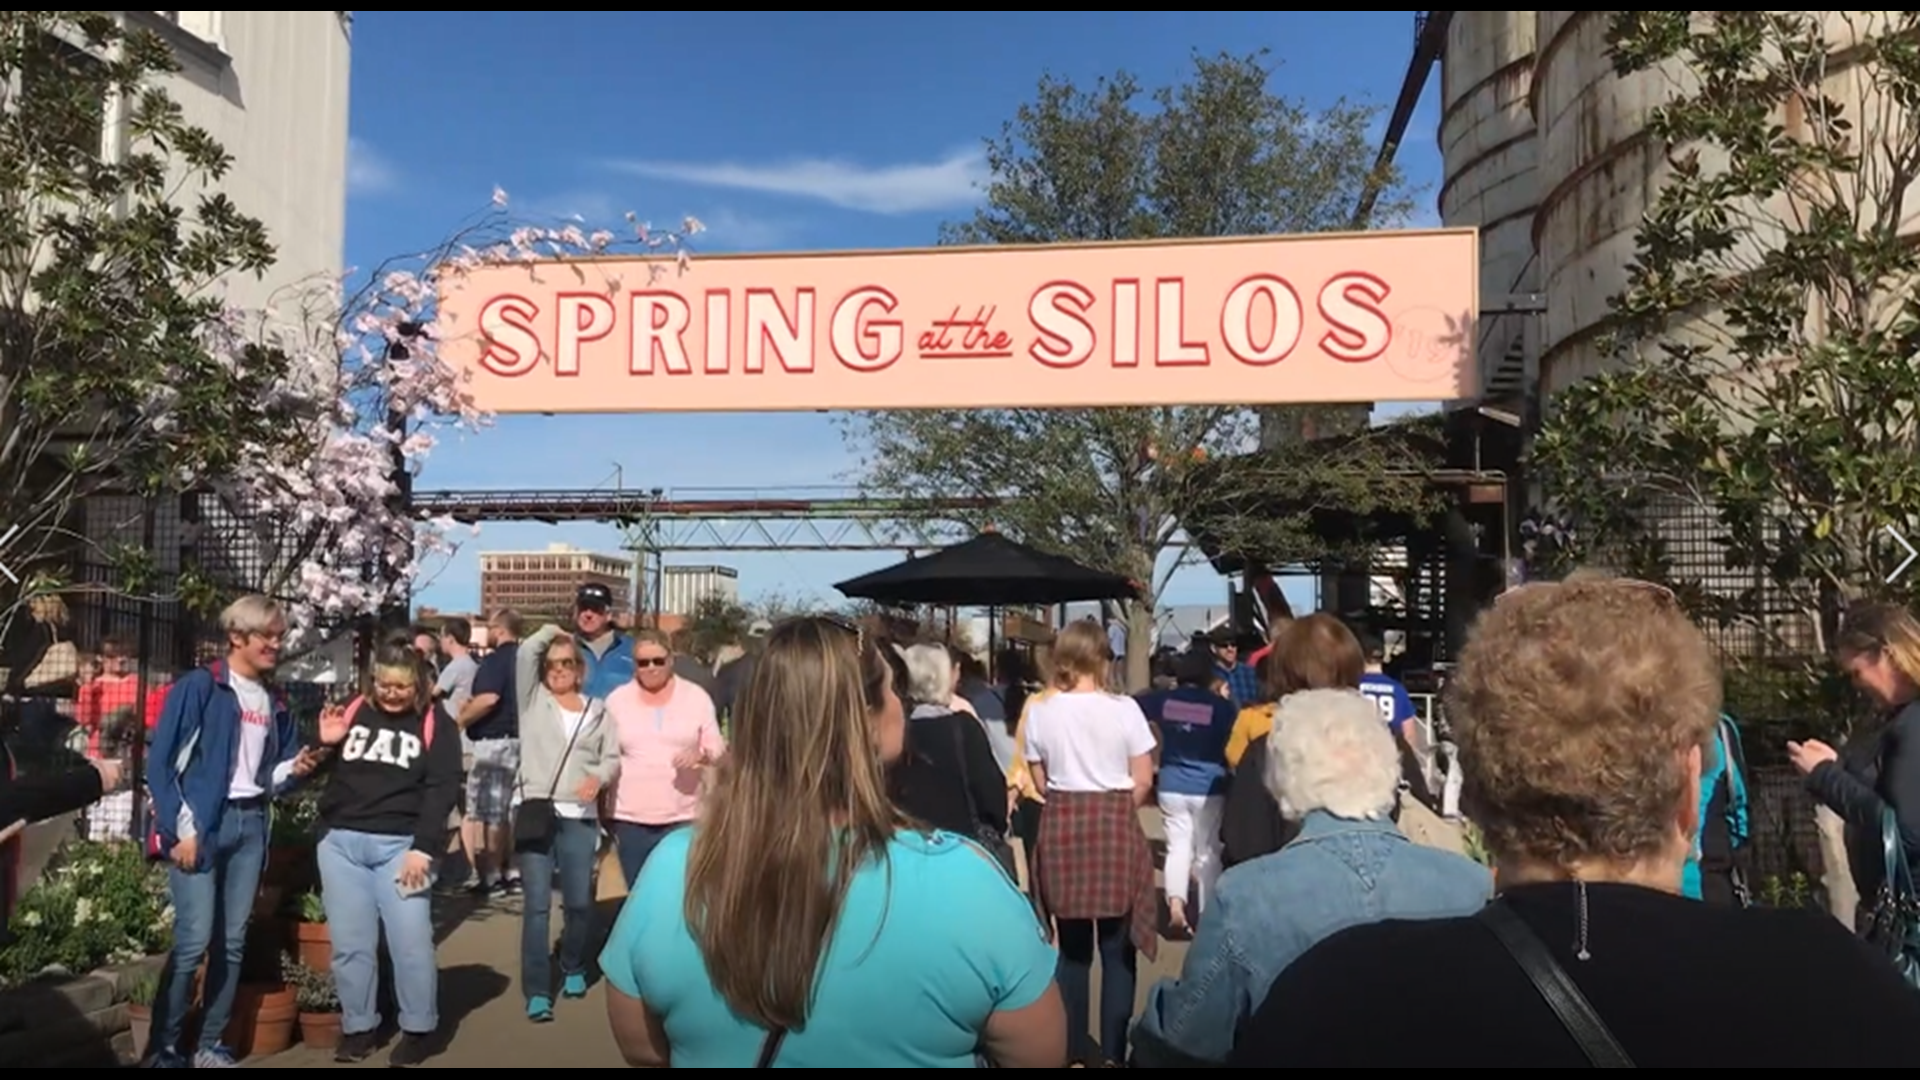 The Waco Conventions and Visitors Bureau said every year more and more people are visiting the city, and Spring at the Silos is a big reason.